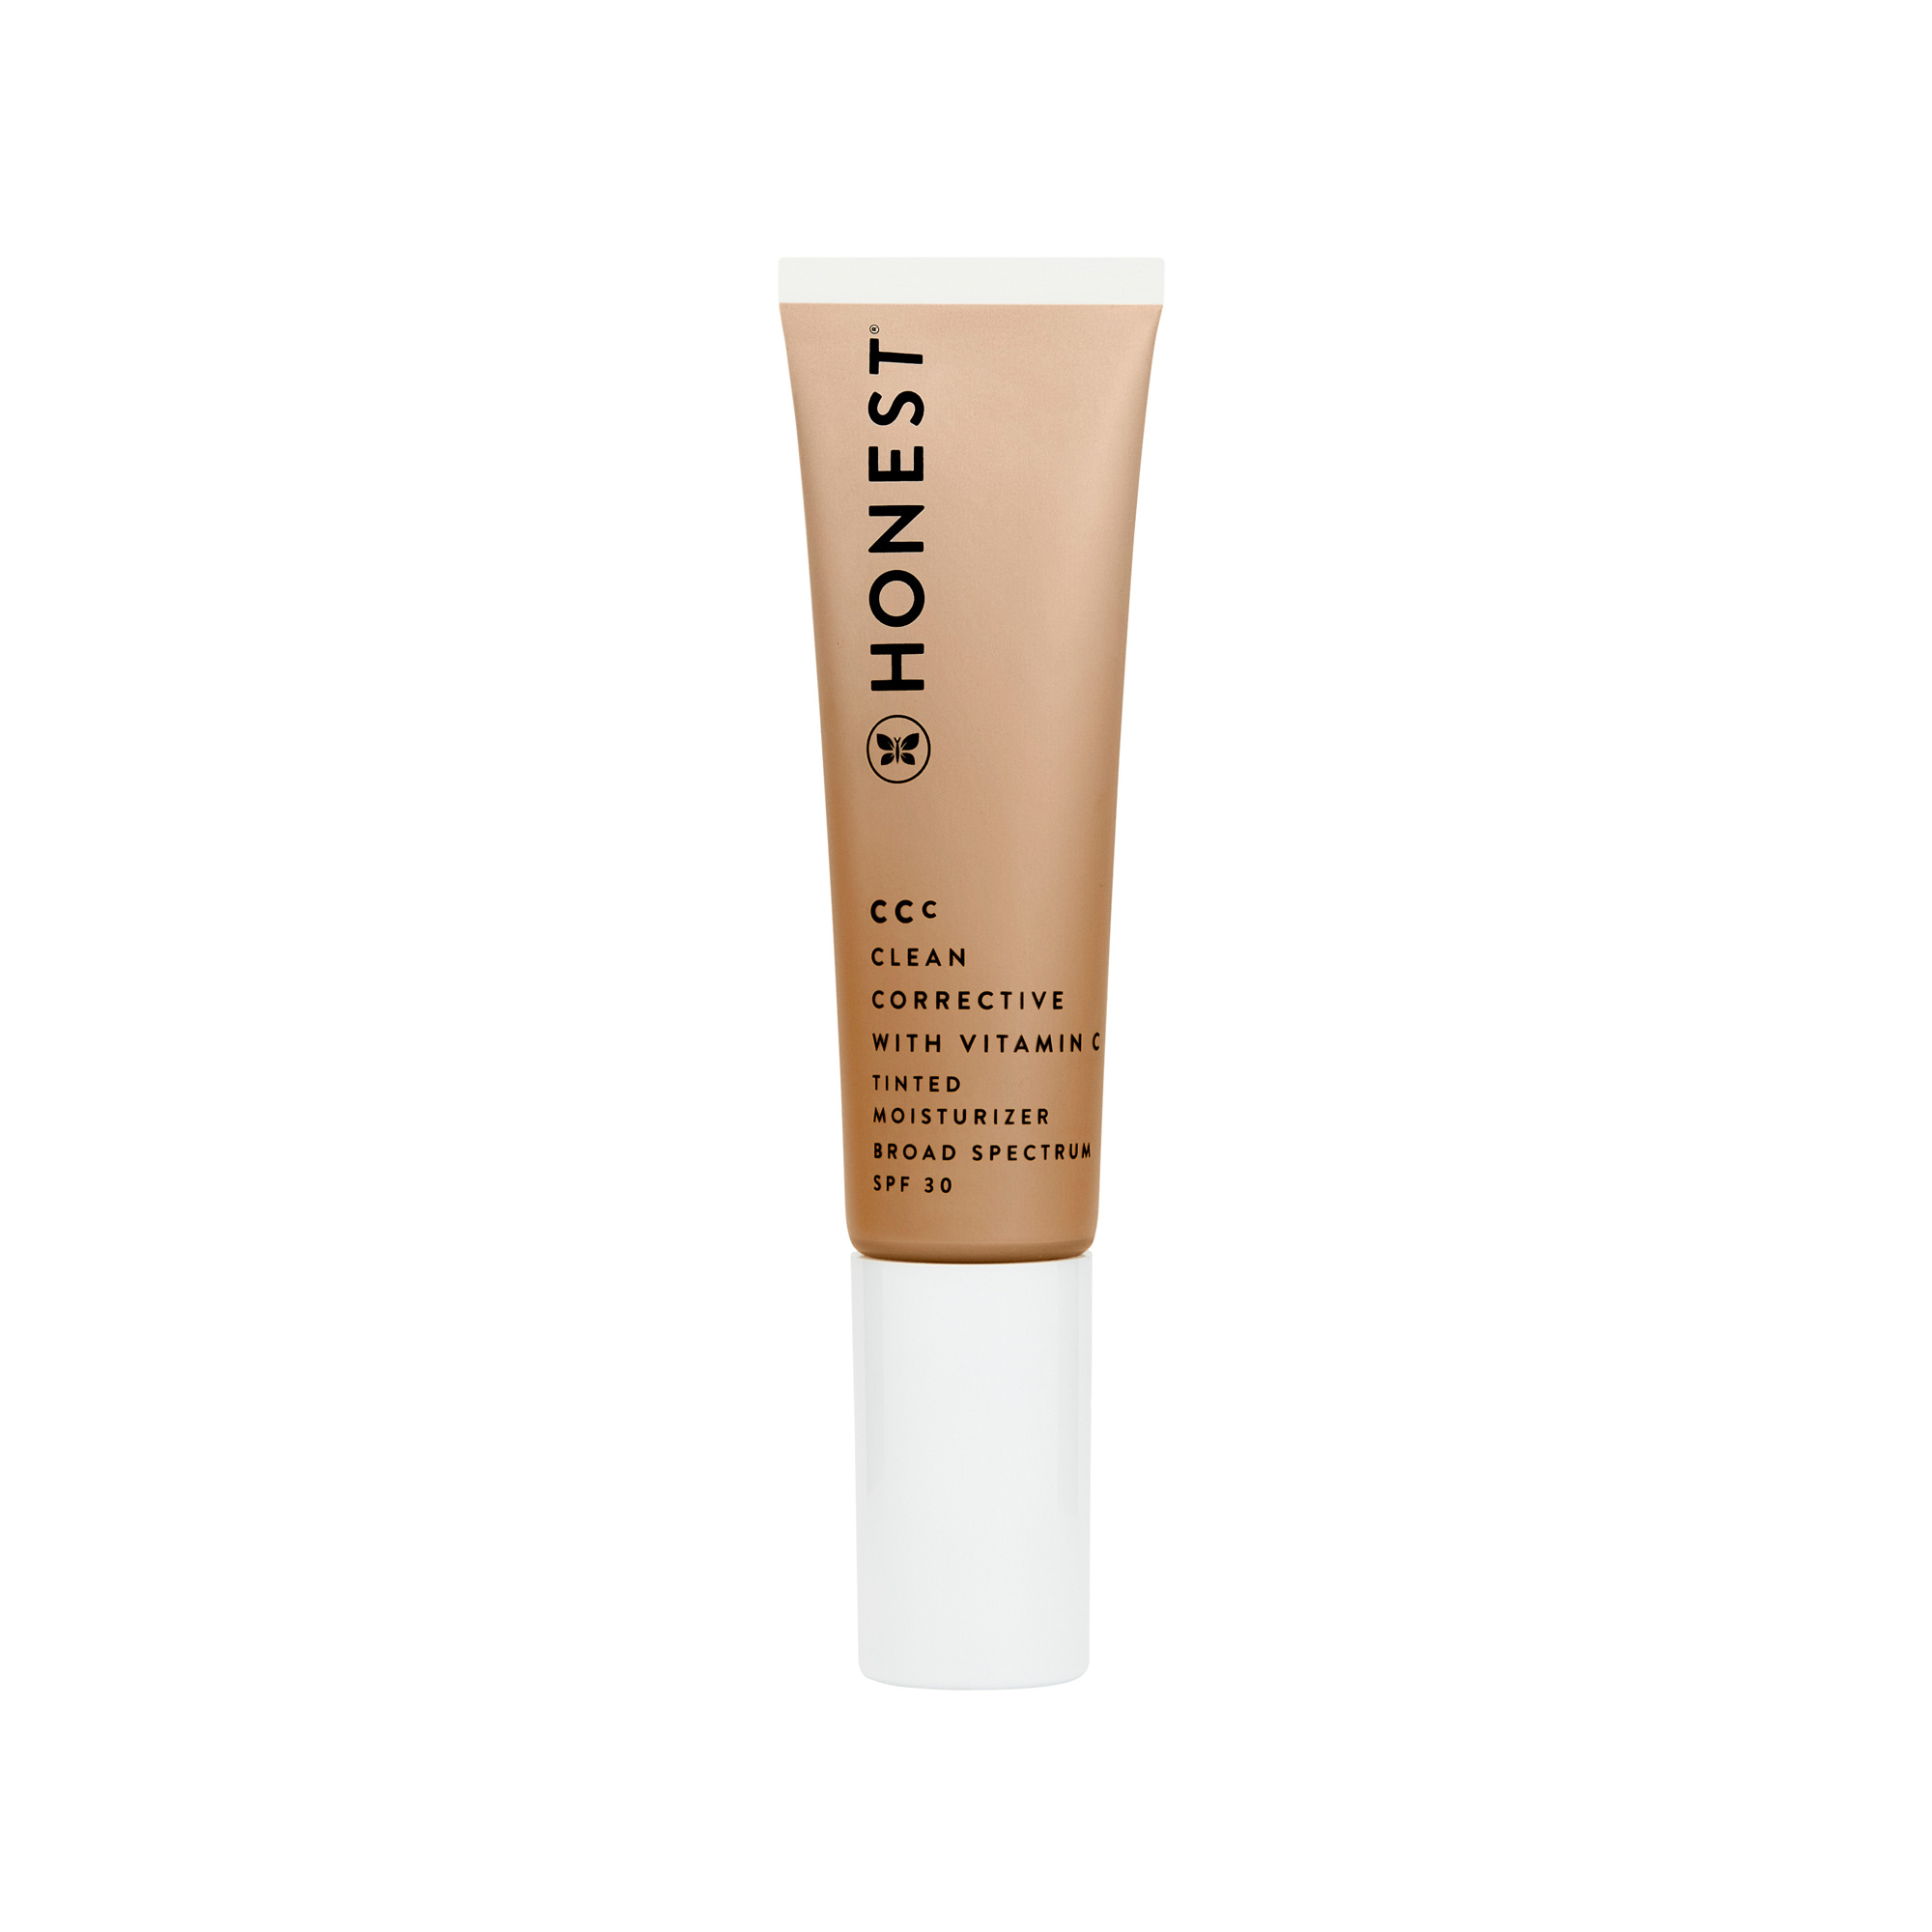 Honest Beauty CCC Clean Corrective With Vitamin C Tinted Moisturizer Broad Spectrum SPF 30, Dune